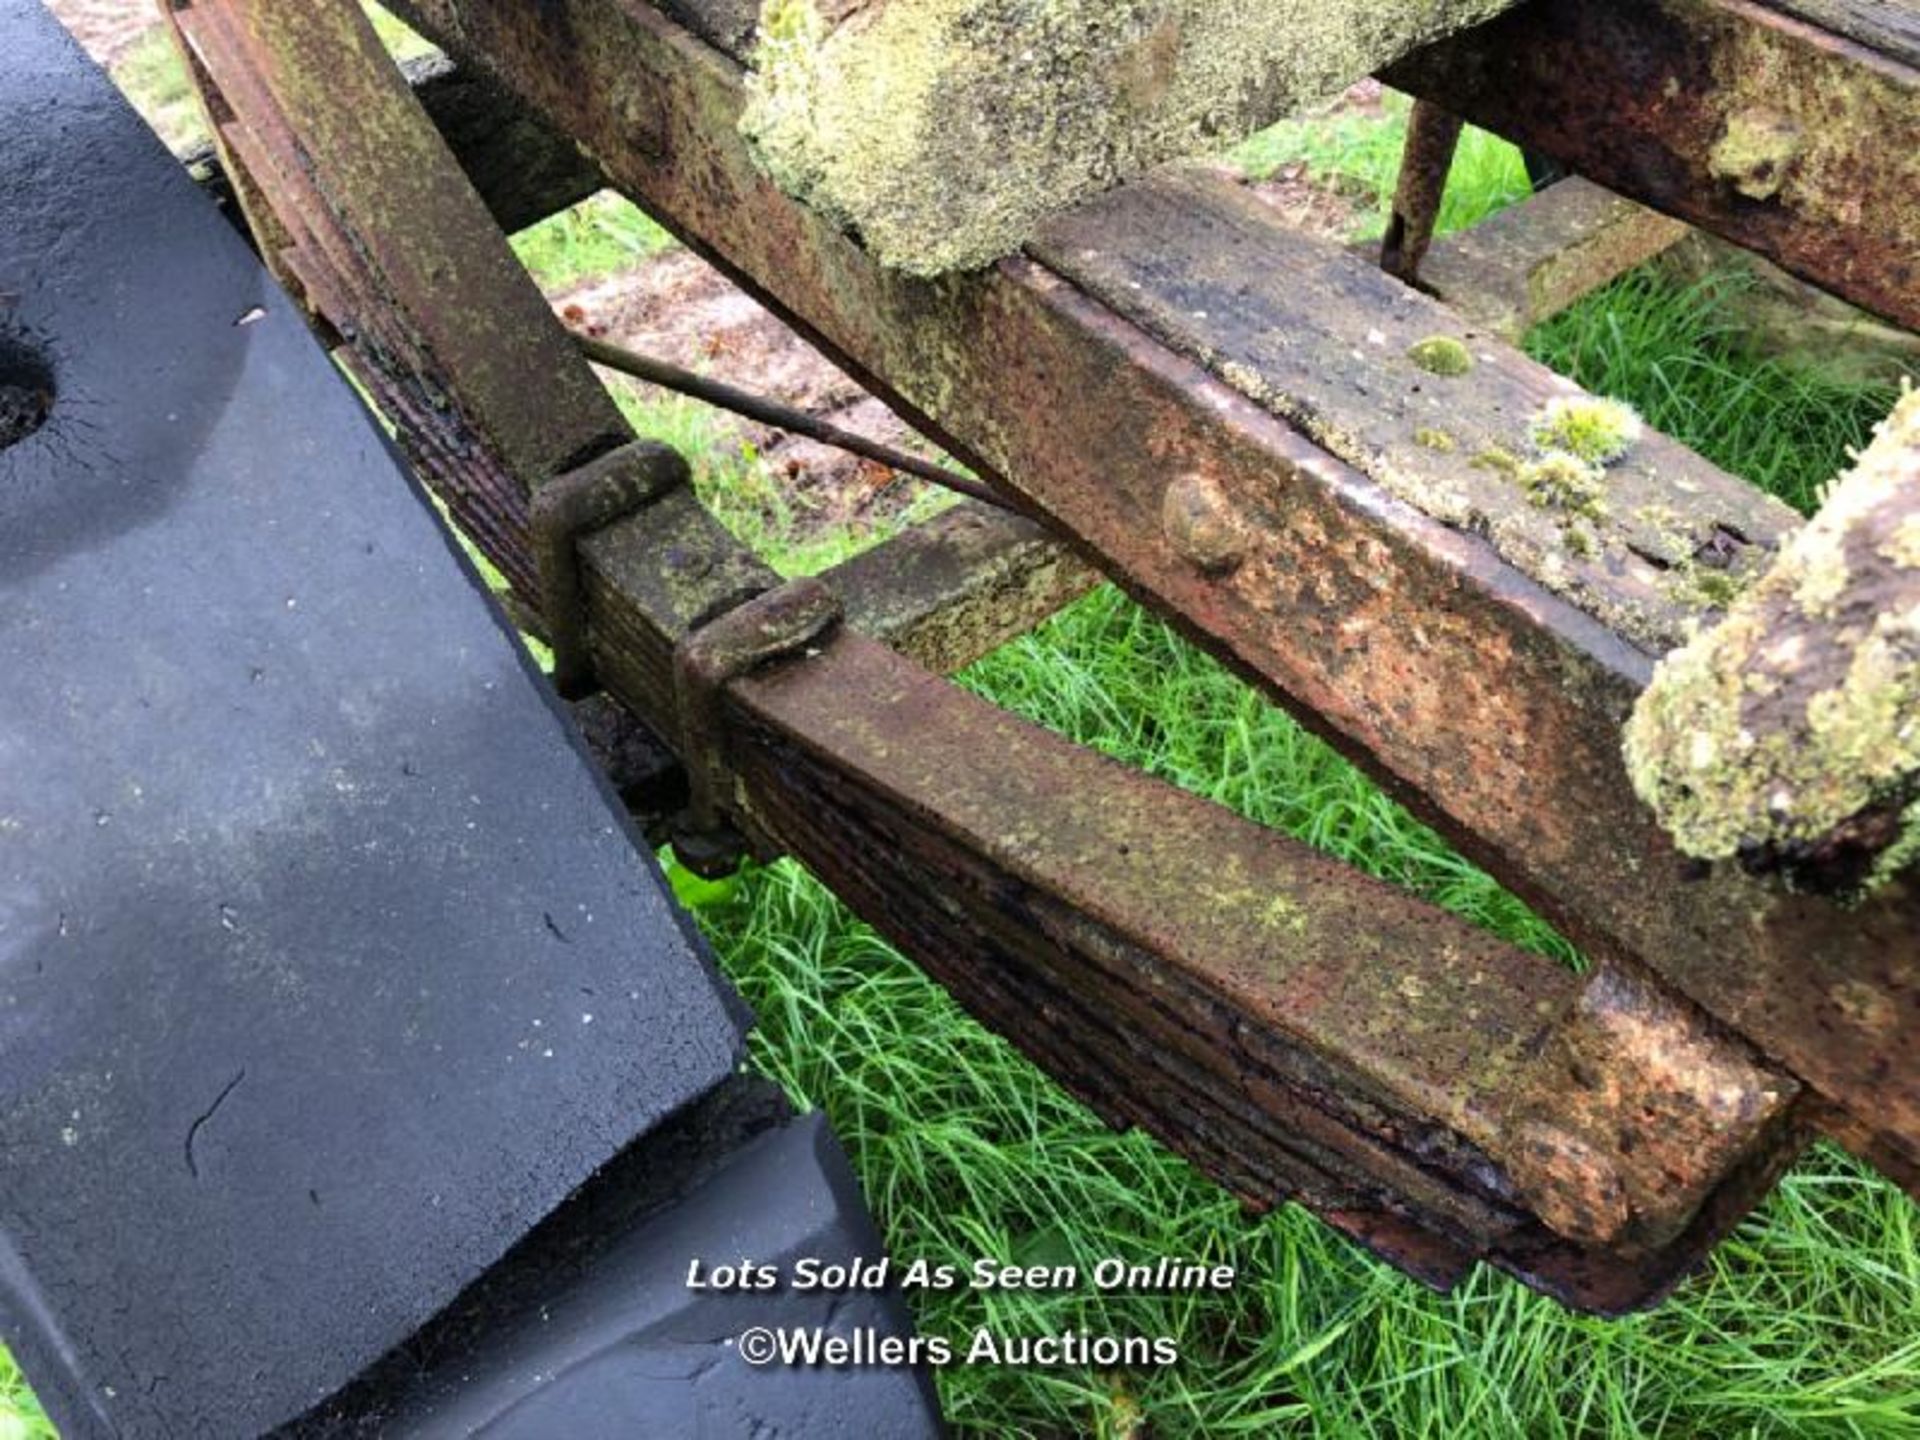 OLD RAILWAY CART, IN NEED OF RESTORATION, TOTAL DIMENSIONS APPROX. 220CM W X 230CM L X 130CM H - Image 7 of 7